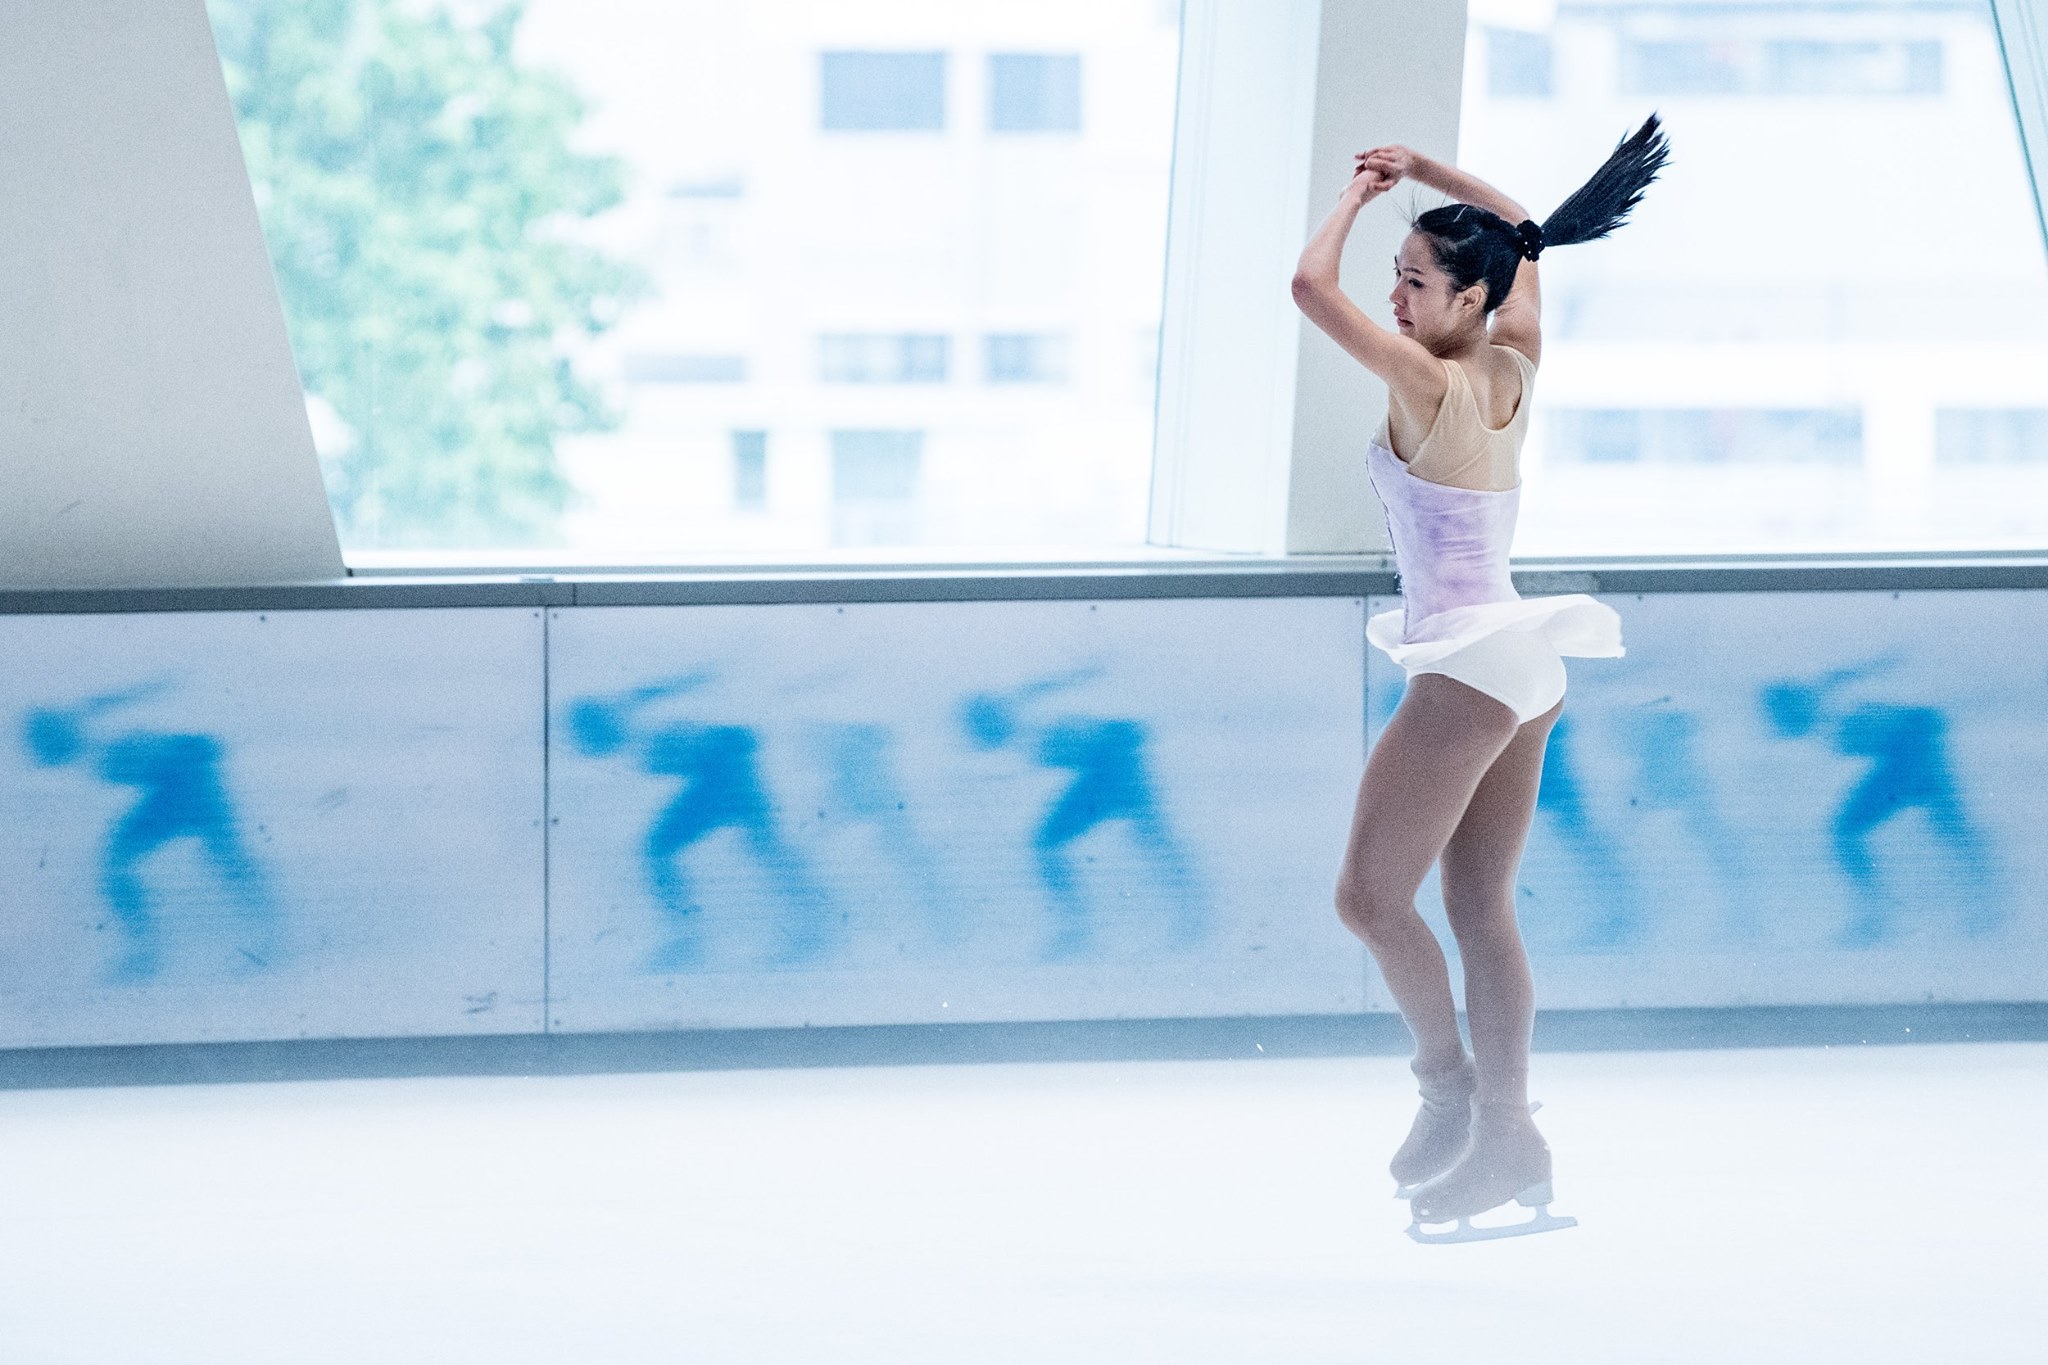 Crystal Chik — figure skater and nursing student —  on how figure skating improved her focus while at school, and how dancing helped her rediscover her love of skating[:zh]戚紫瑩- 花樣滑冰選手及護理系學生- 談談花樣滑冰如何改善學習專注力及跳舞如何令自己從新愛上溜冰